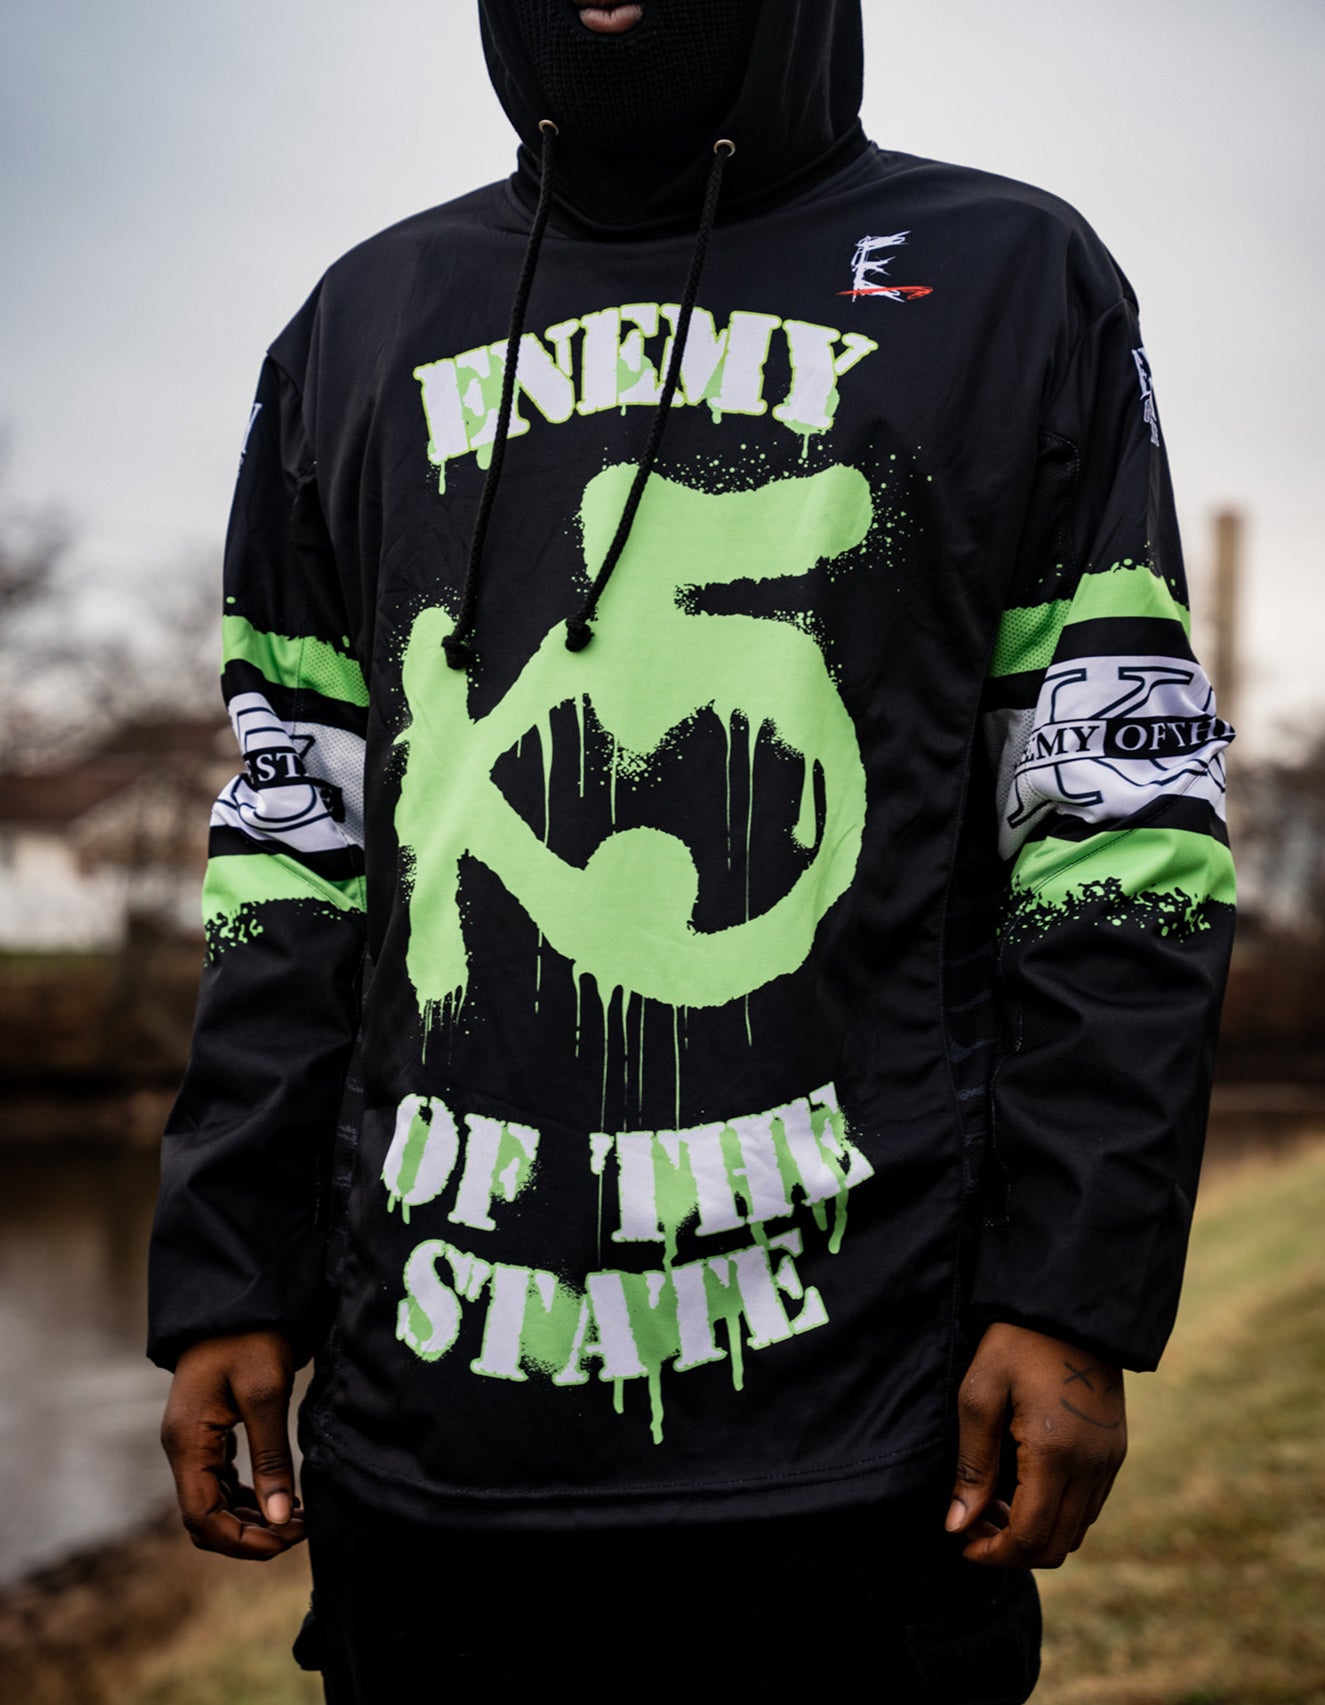 Enemy of the State " Degeneration K5 " Jersey